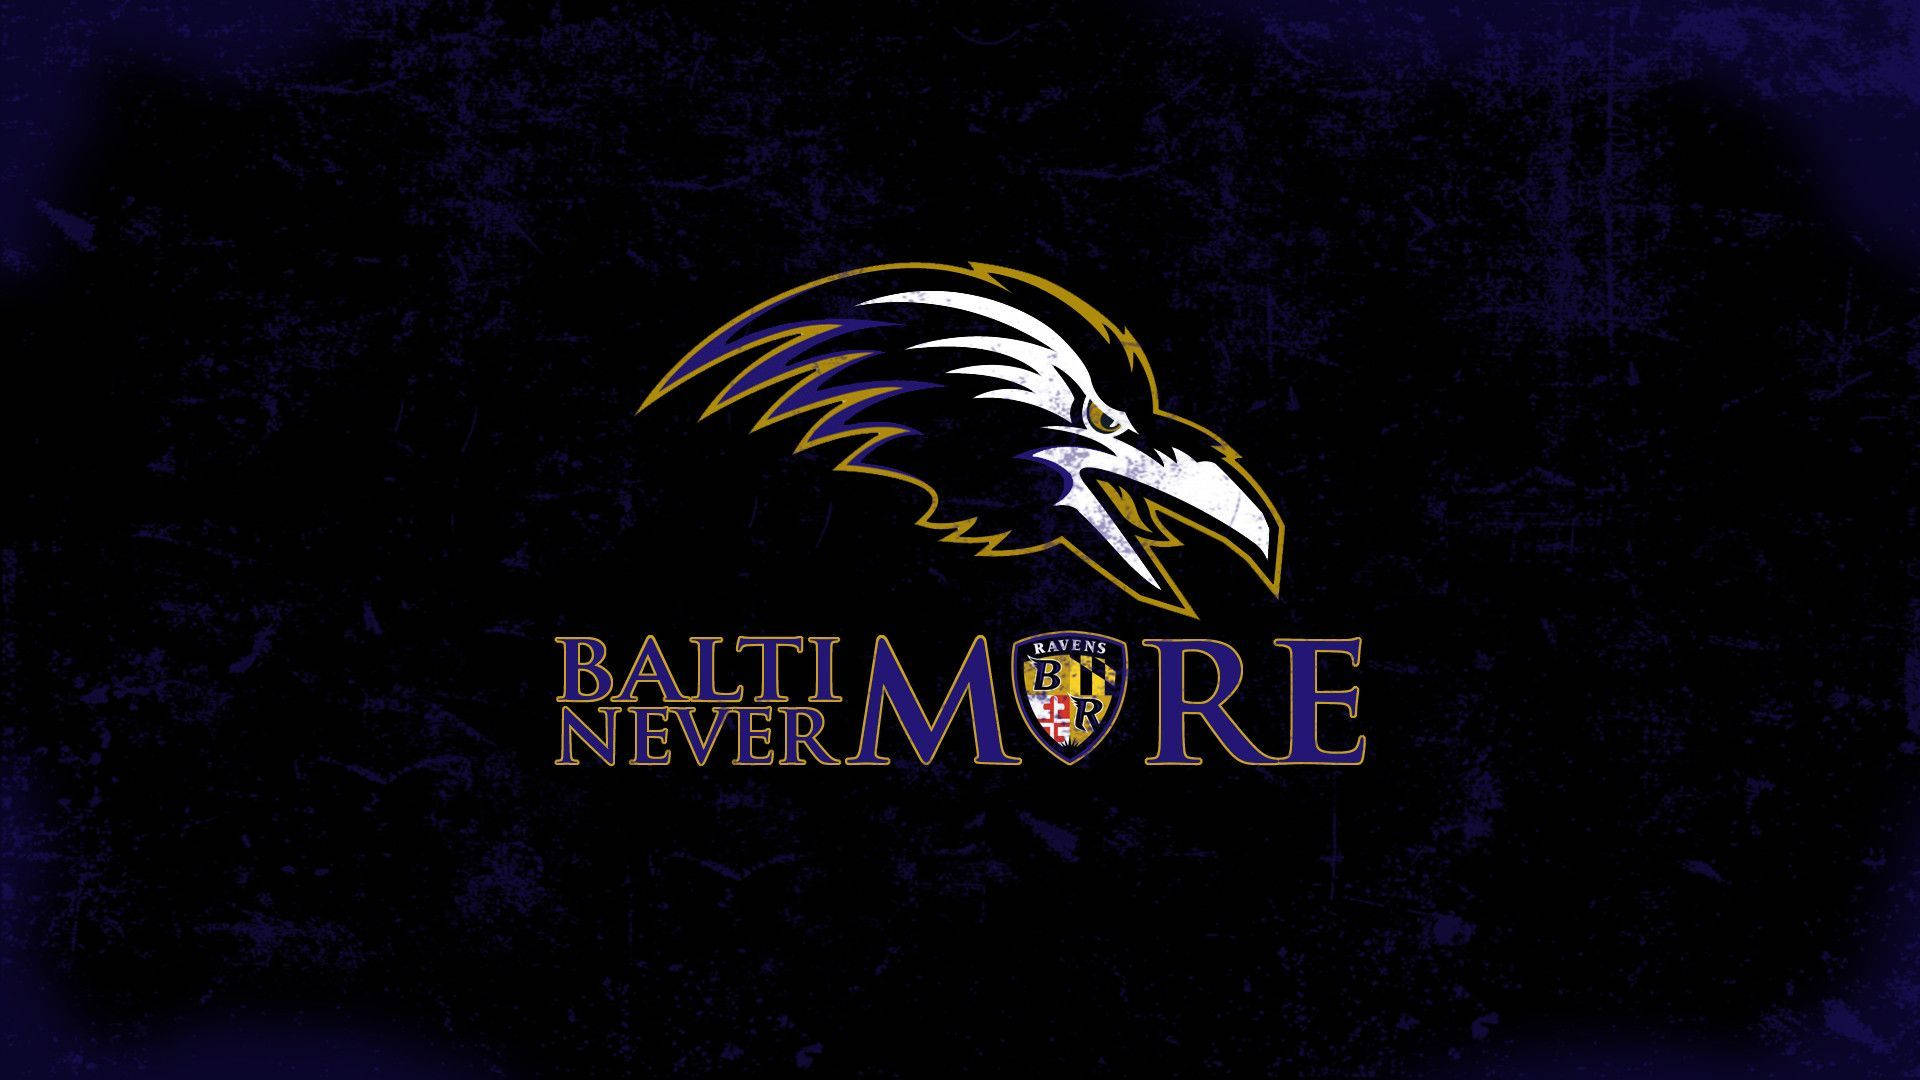 Baltimore Ravens Nevermore Poster Background